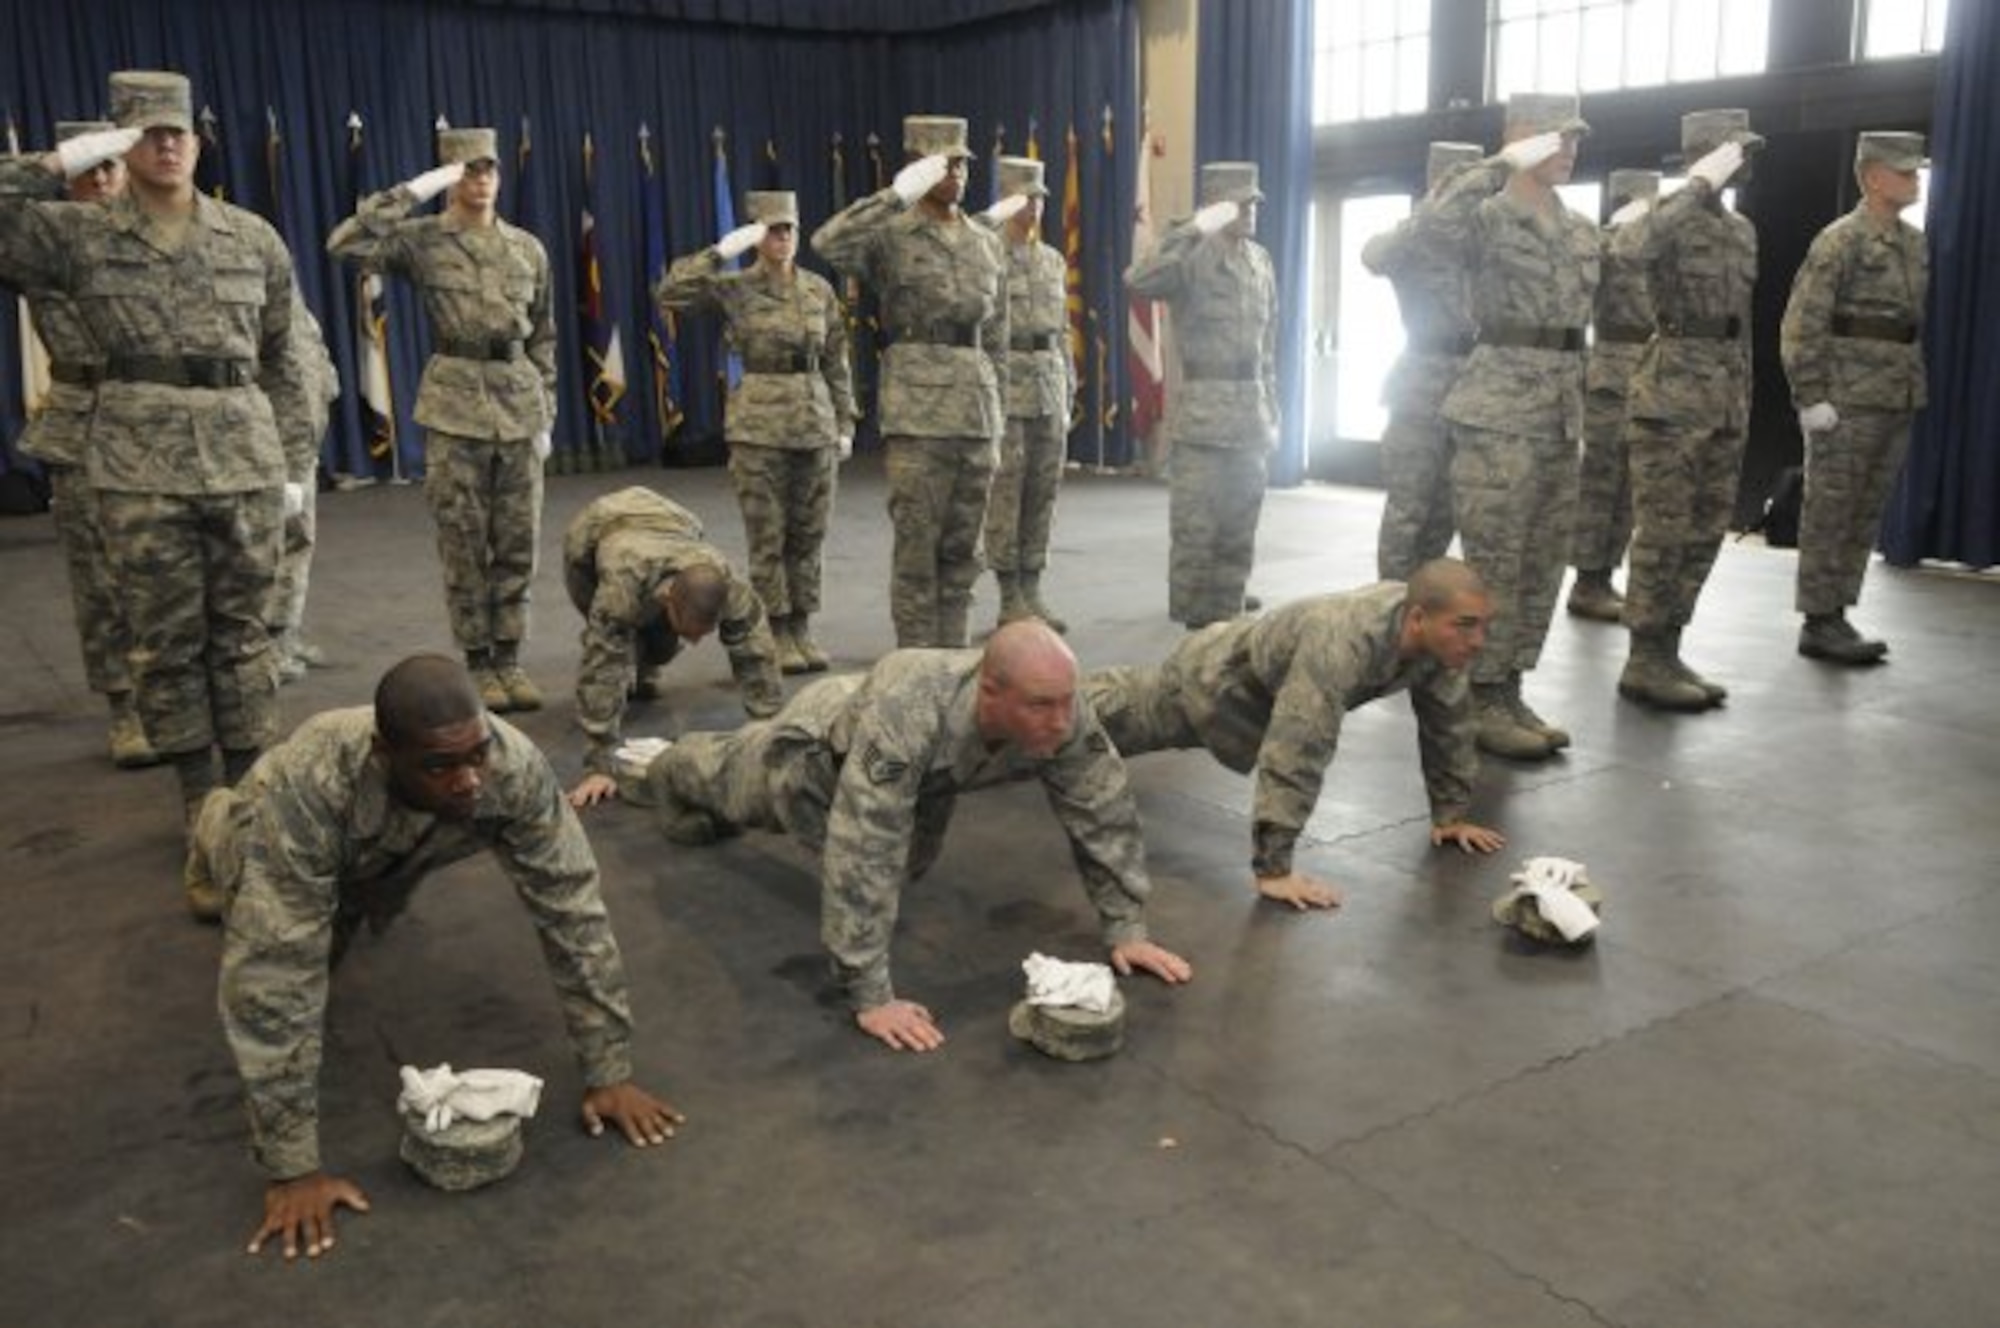 United States Air Force Honor Guard technical school trainees stay in the push-up position while the rest of the class holds their salute during practice, Feb. 22, 2010, inside the Honor Guard's C Hall on Bolling Air Force Base, D.C. While saluting, trainees are taught to not break bearing for any reason. As a form of discipline for mistakes, push-ups are a common practice among the honor guard technical school instructors. (U.S. Air Force photo by Senior Airman Marleah Miller)